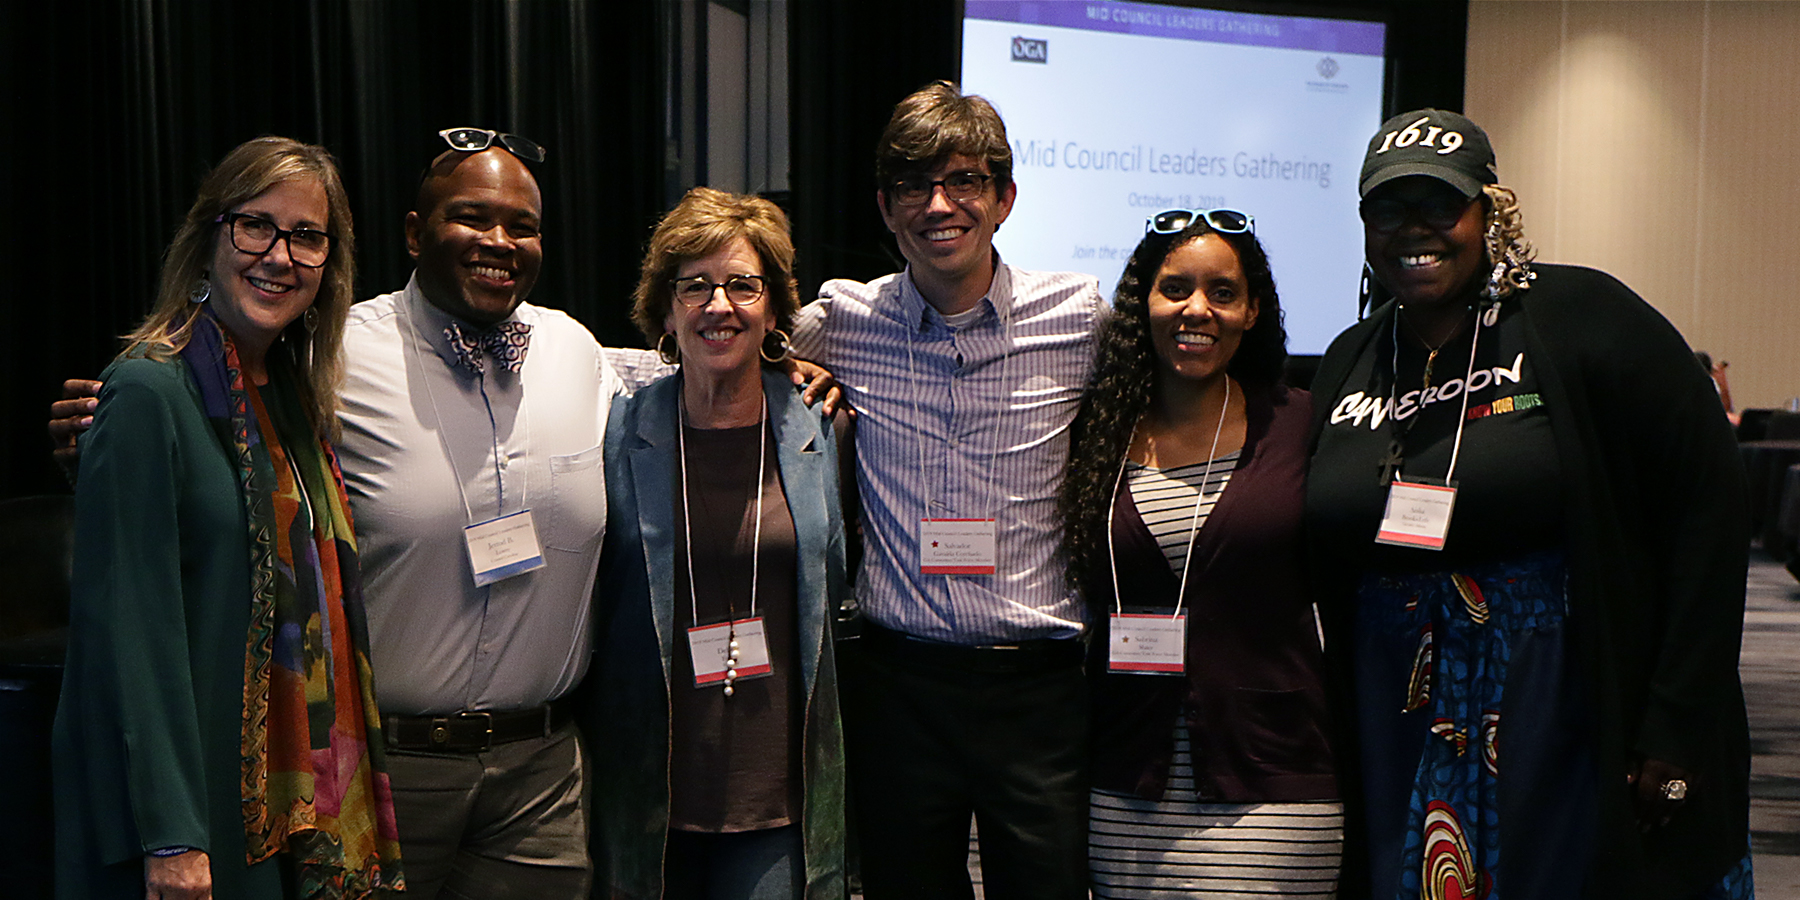 Members of the 2020 Vision Team met recently with Tracy Keenan, who wrote a song based off the team’s Guiding Statement. (Left to Right) Tracy Keenan, Jerrod Lowry, Debbie Foster, Salvador Gavalda, and Aisha Brooks-Lytle. Photo by Rick Jones.